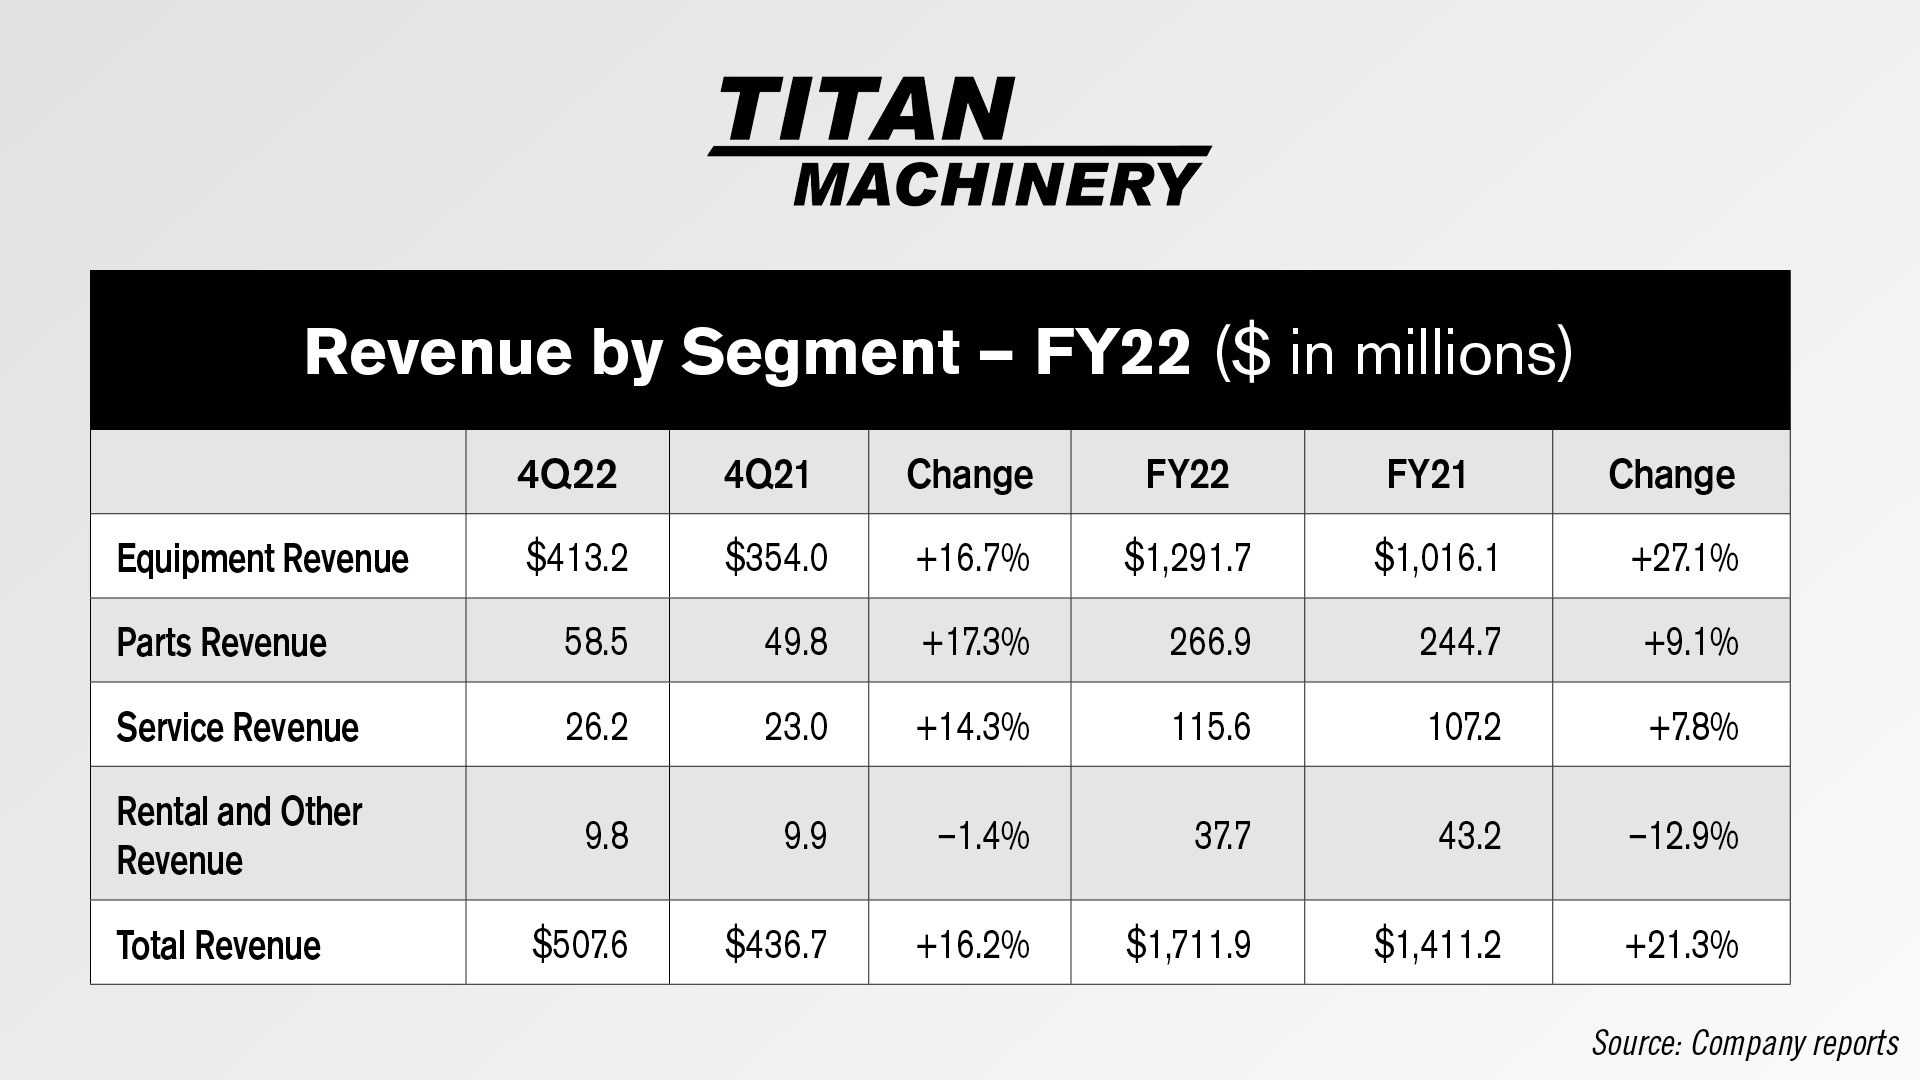 Titan machinery FY22 table